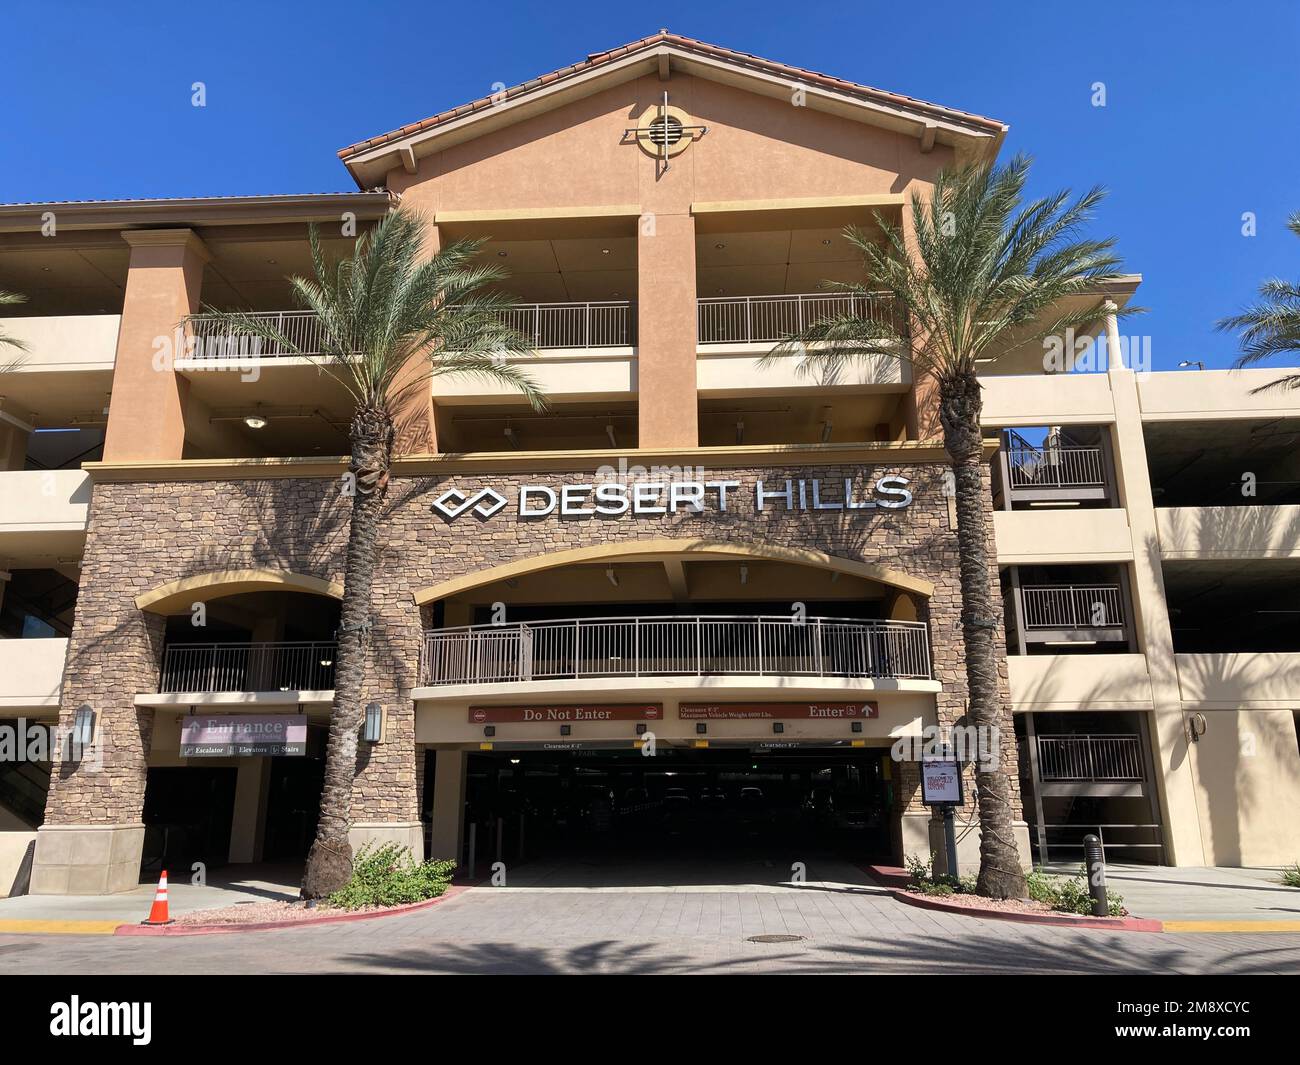 Multi level parking garage entrance and exit at Desert Hills Premium Outlets mall - Cabazon, California, USA - 2022 Stock Photo